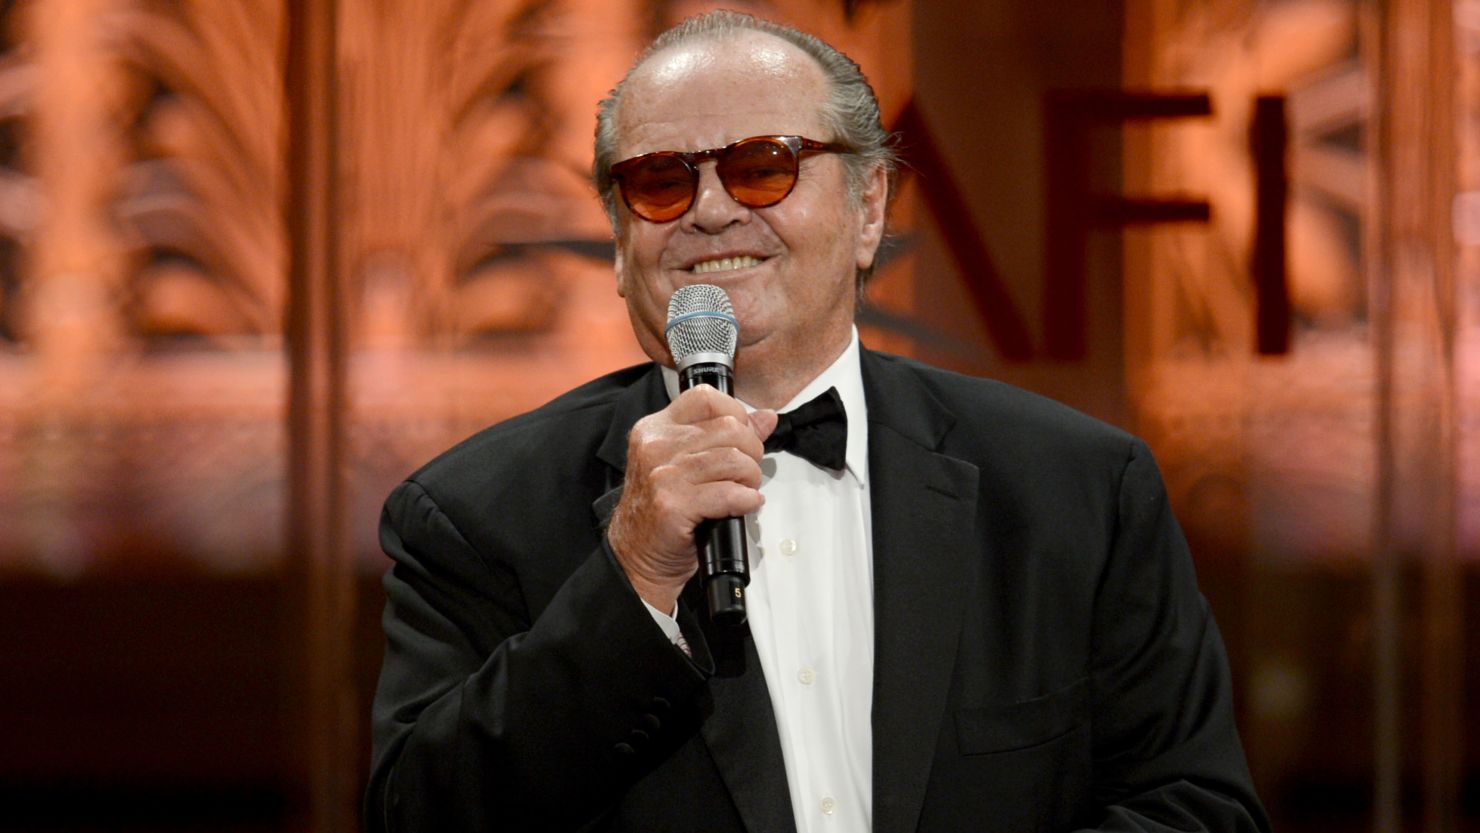 Jack Nicholson wearing a black suit and mic